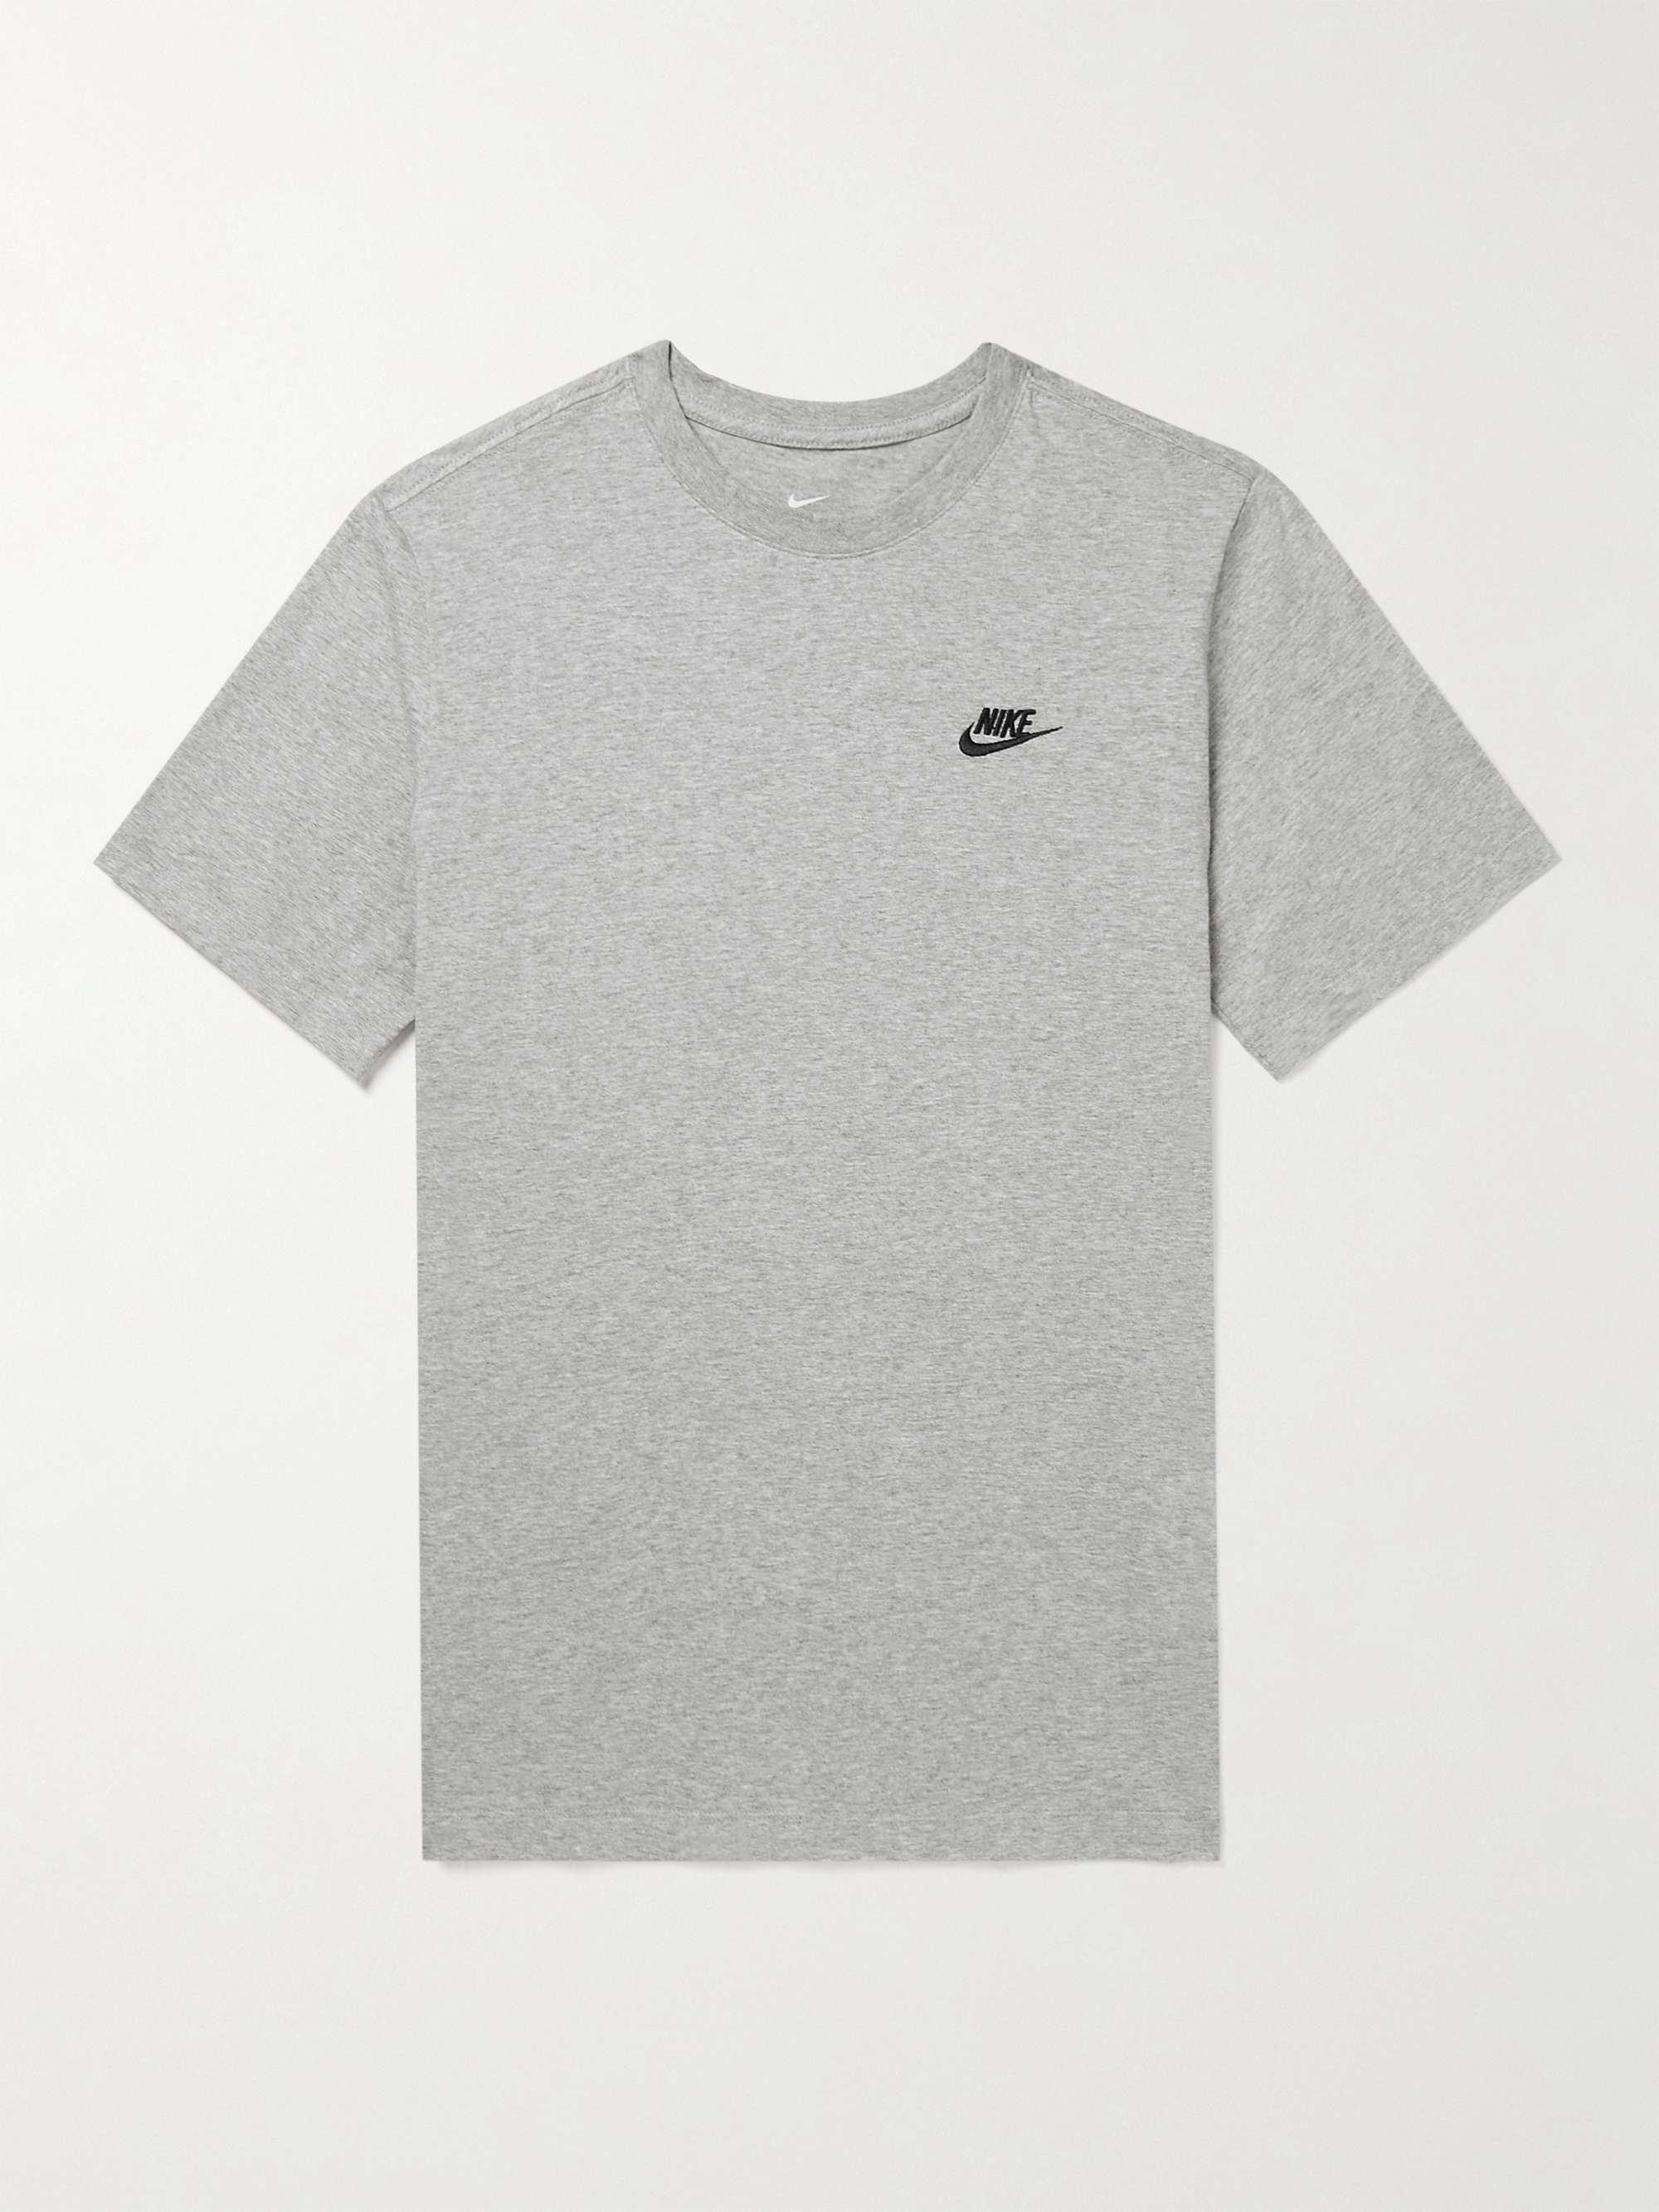 Gray Logo-Embroidered Cotton-Jersey T-Shirt | NIKE | MR PORTER